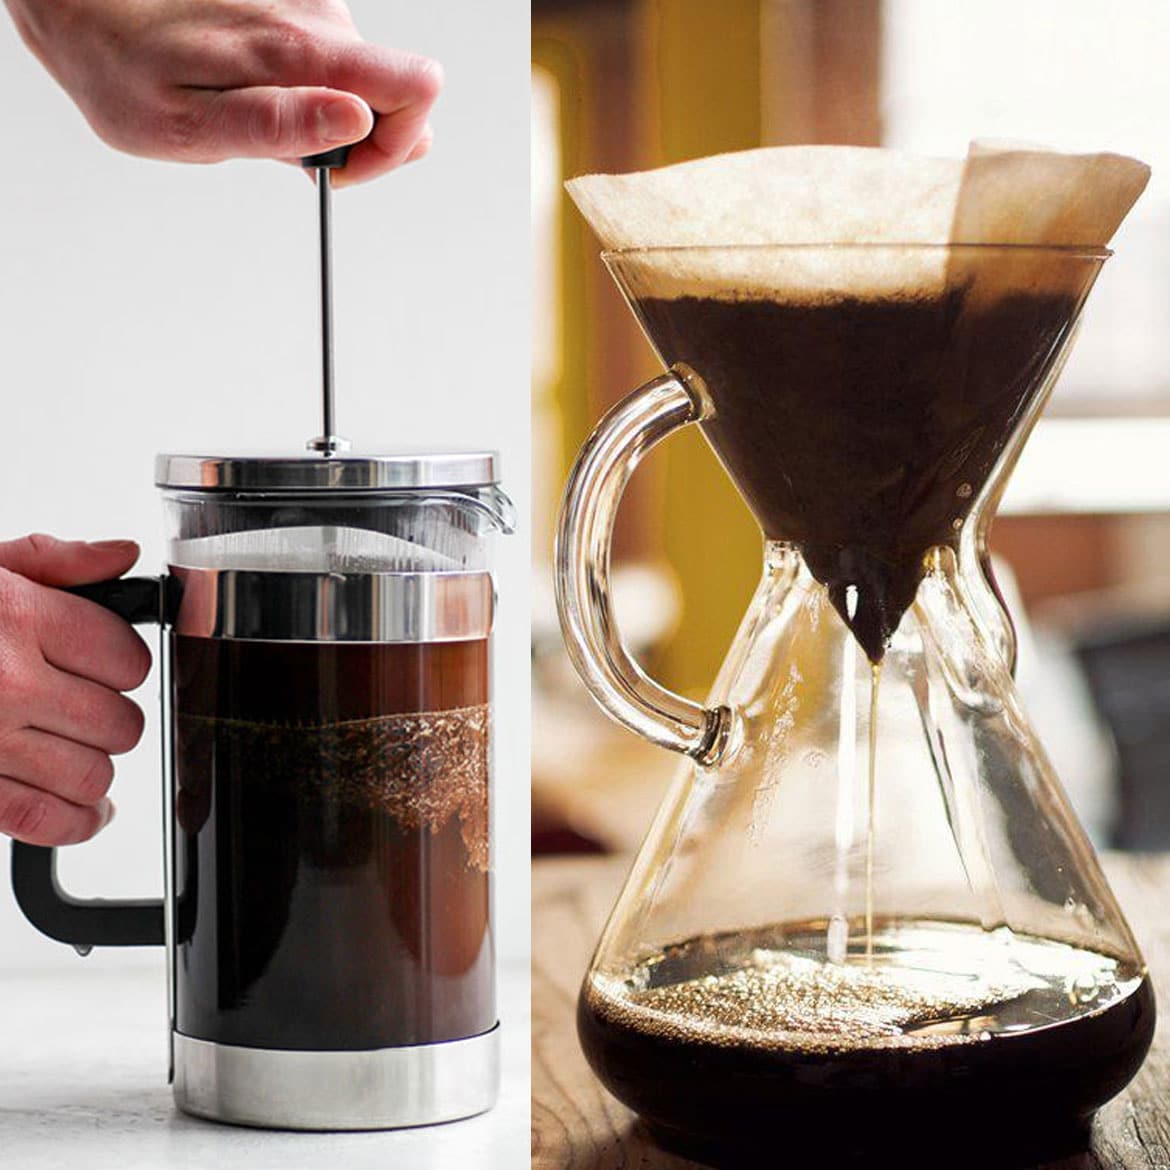 Whats The Difference Between A French Press And A Pour Over?